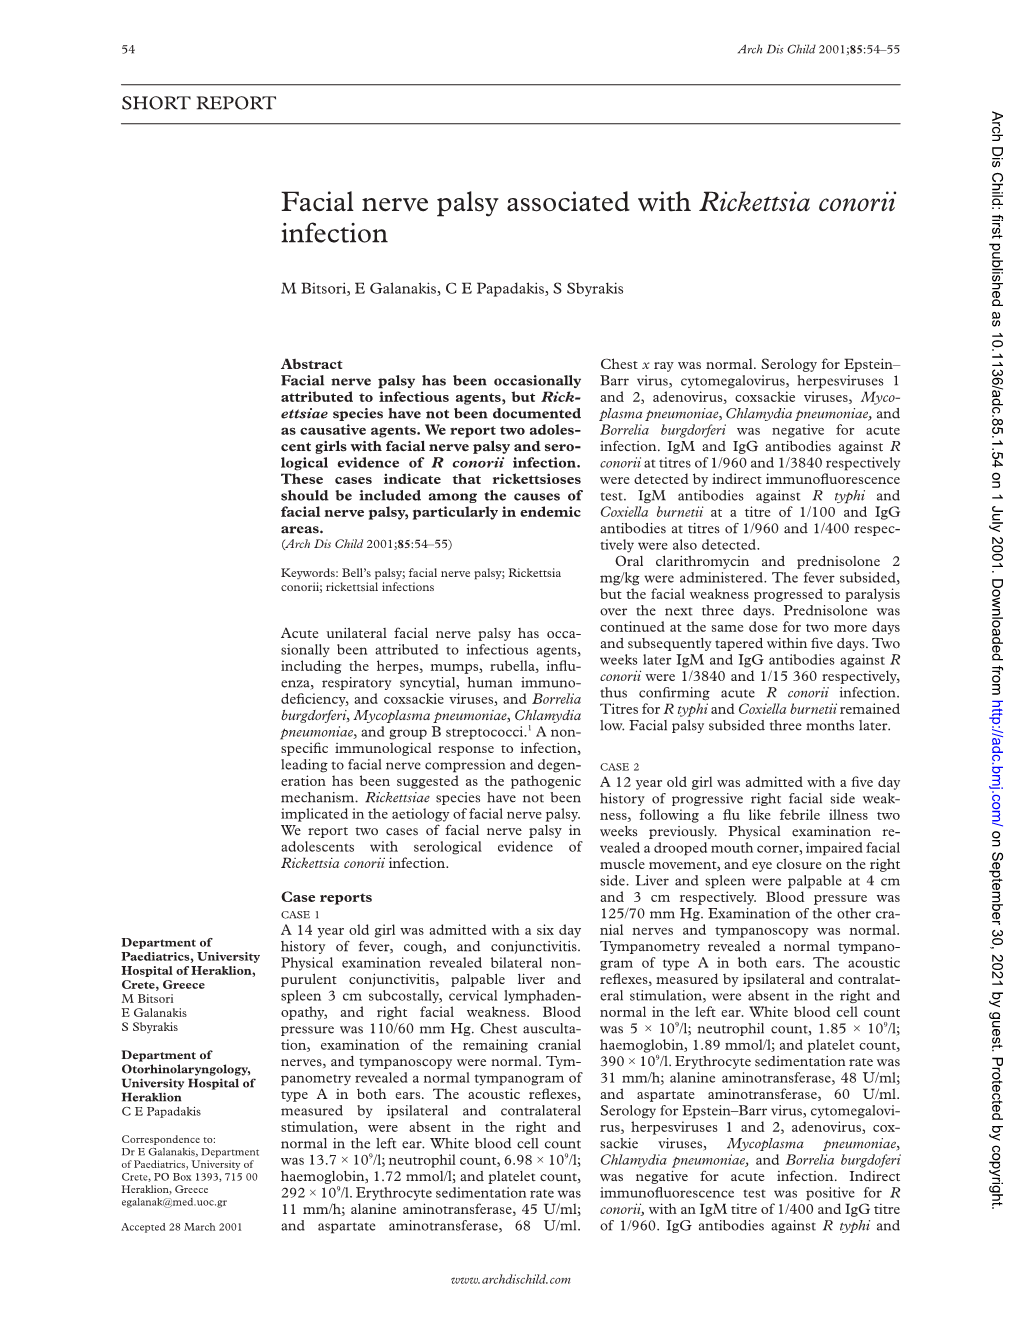 Facial Nerve Palsy Associated with Rickettsia Conorii Infection